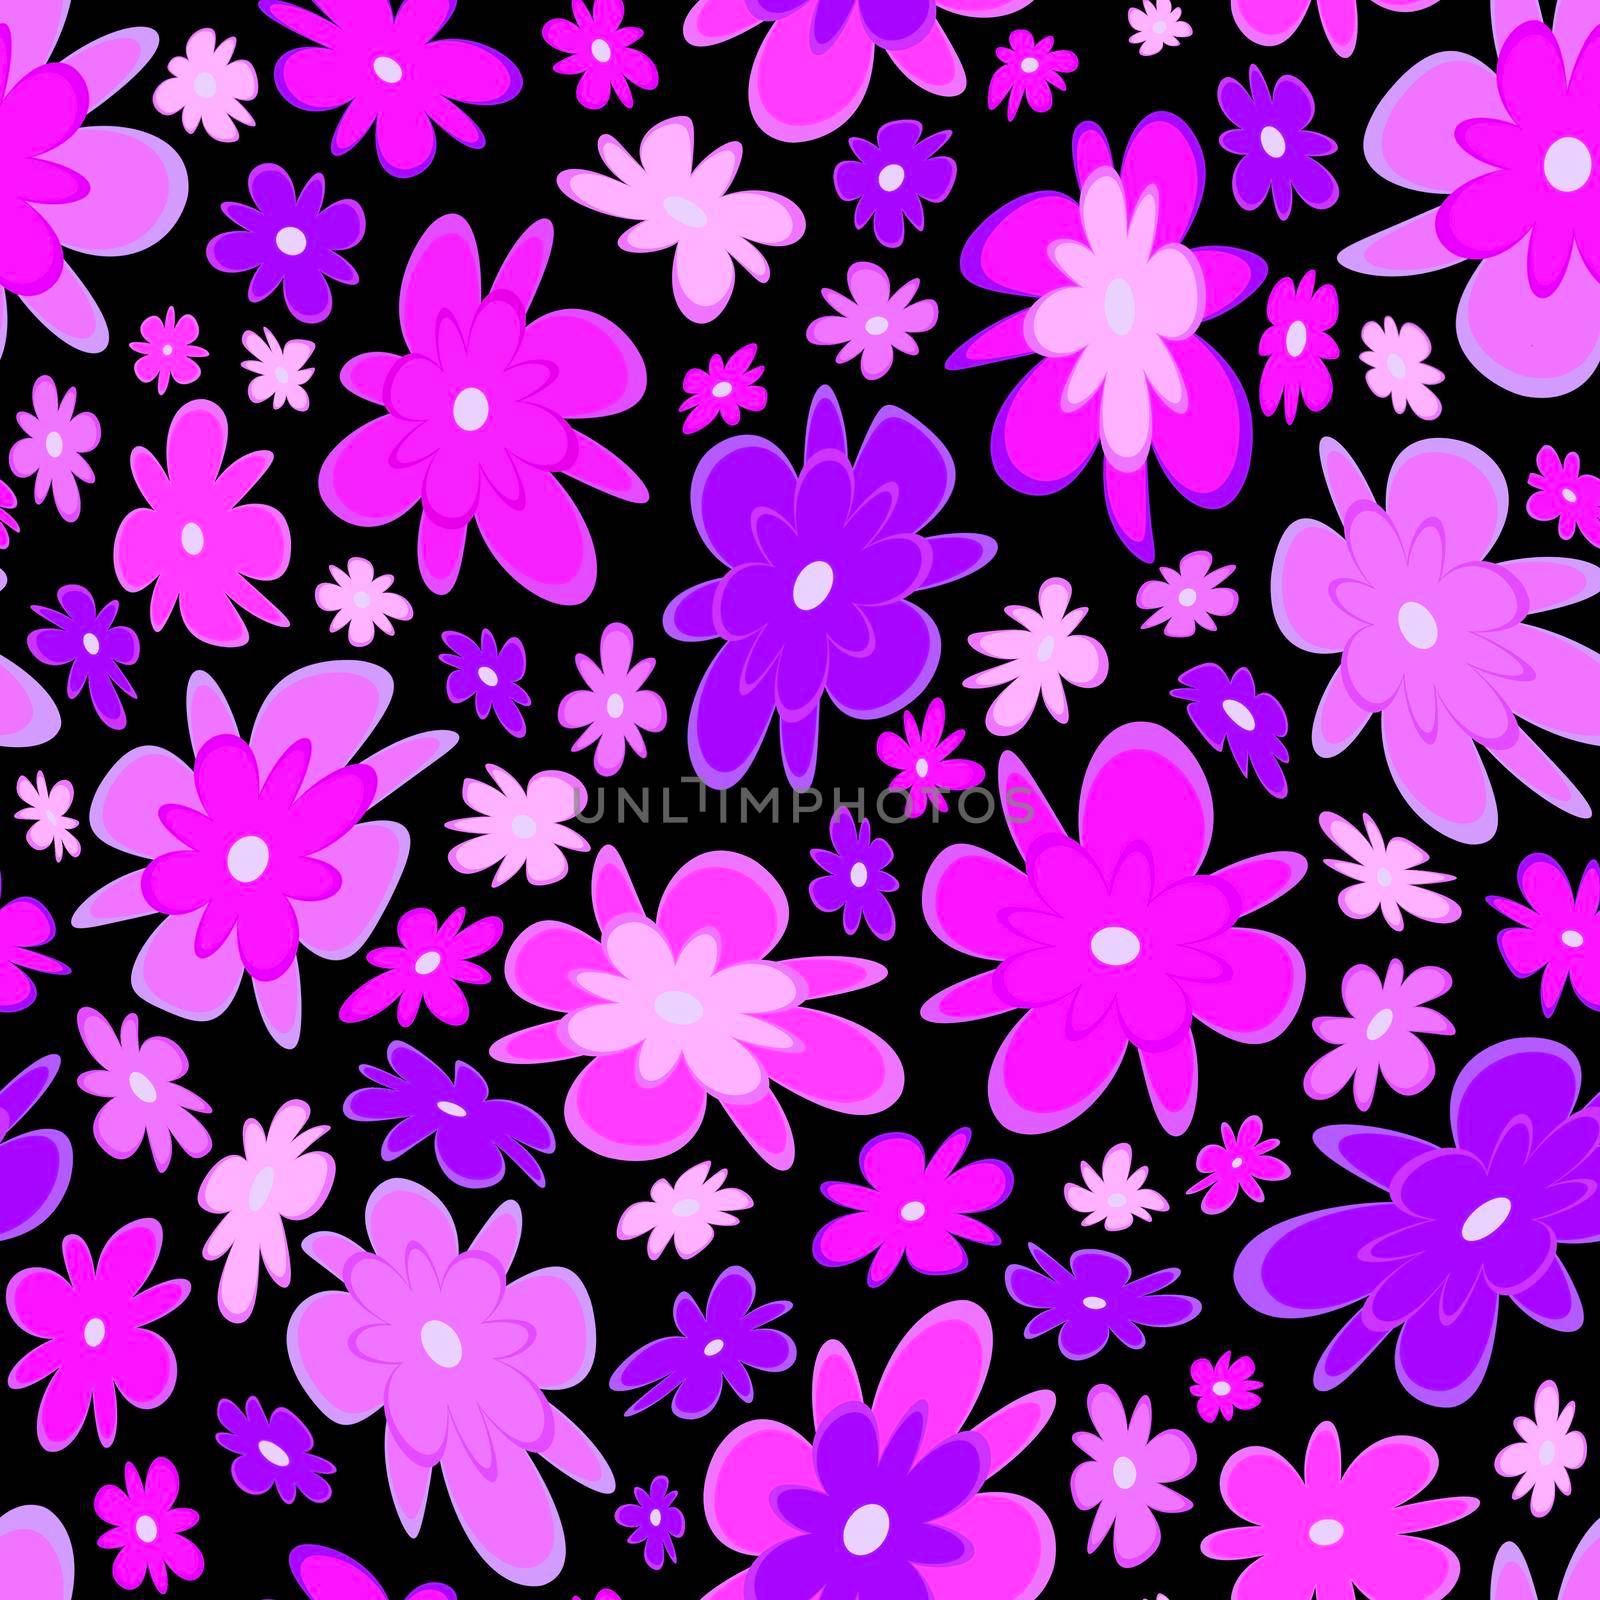 Trendy fabric pattern with miniature flowers.Summer print.Fashion design.Motifs scattered random.Elegant template for fashion prints.Good for fashion,textile,fabric,gift wrapping paper.Pink on black.